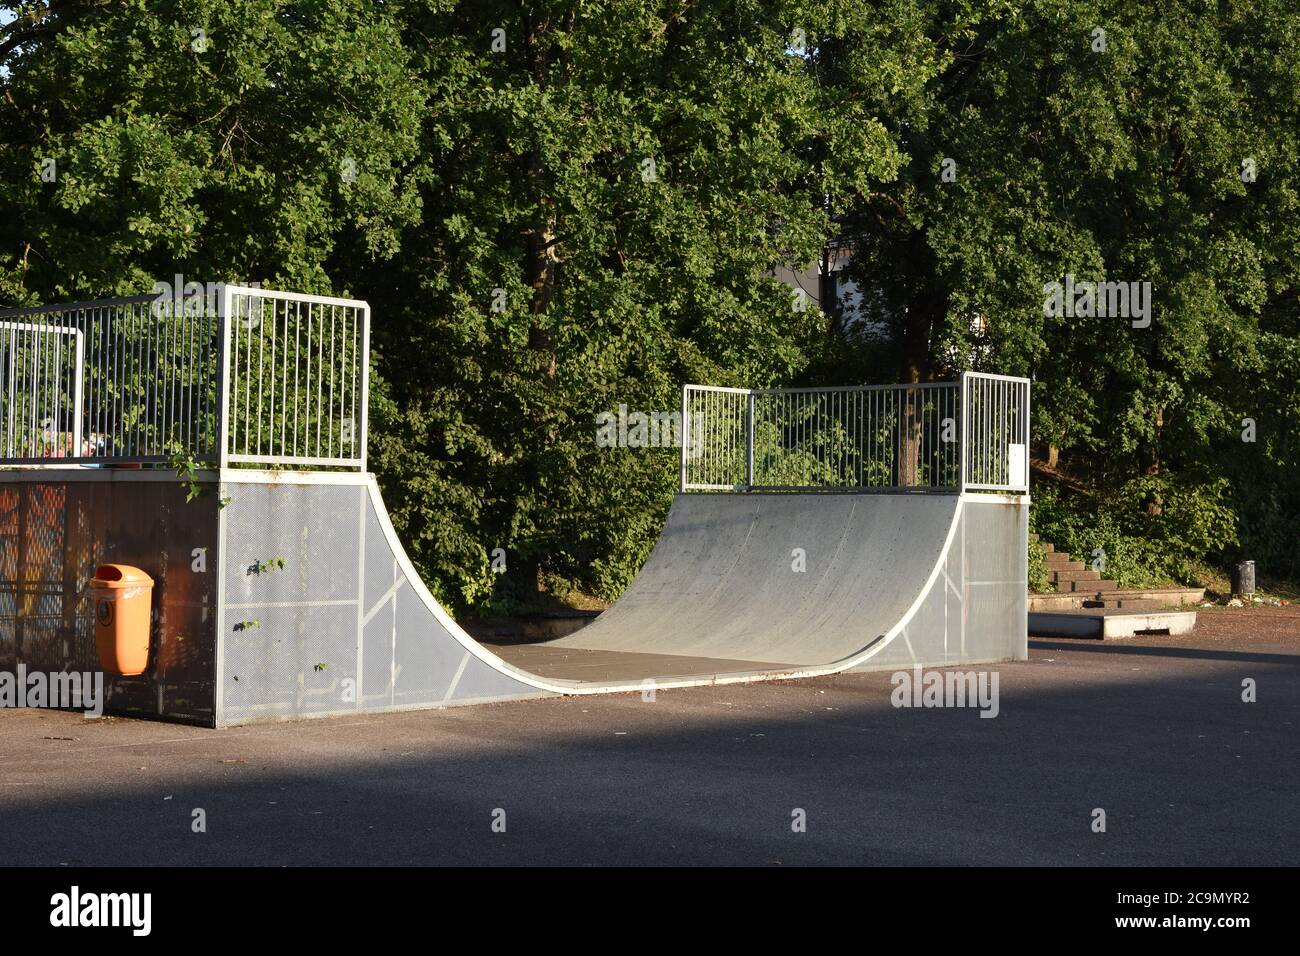 Skateboard ramp made from aluminium and wood in school playground without people due to coronavirus and Covid-19 Measurement to keep social distancing. Stock Photo